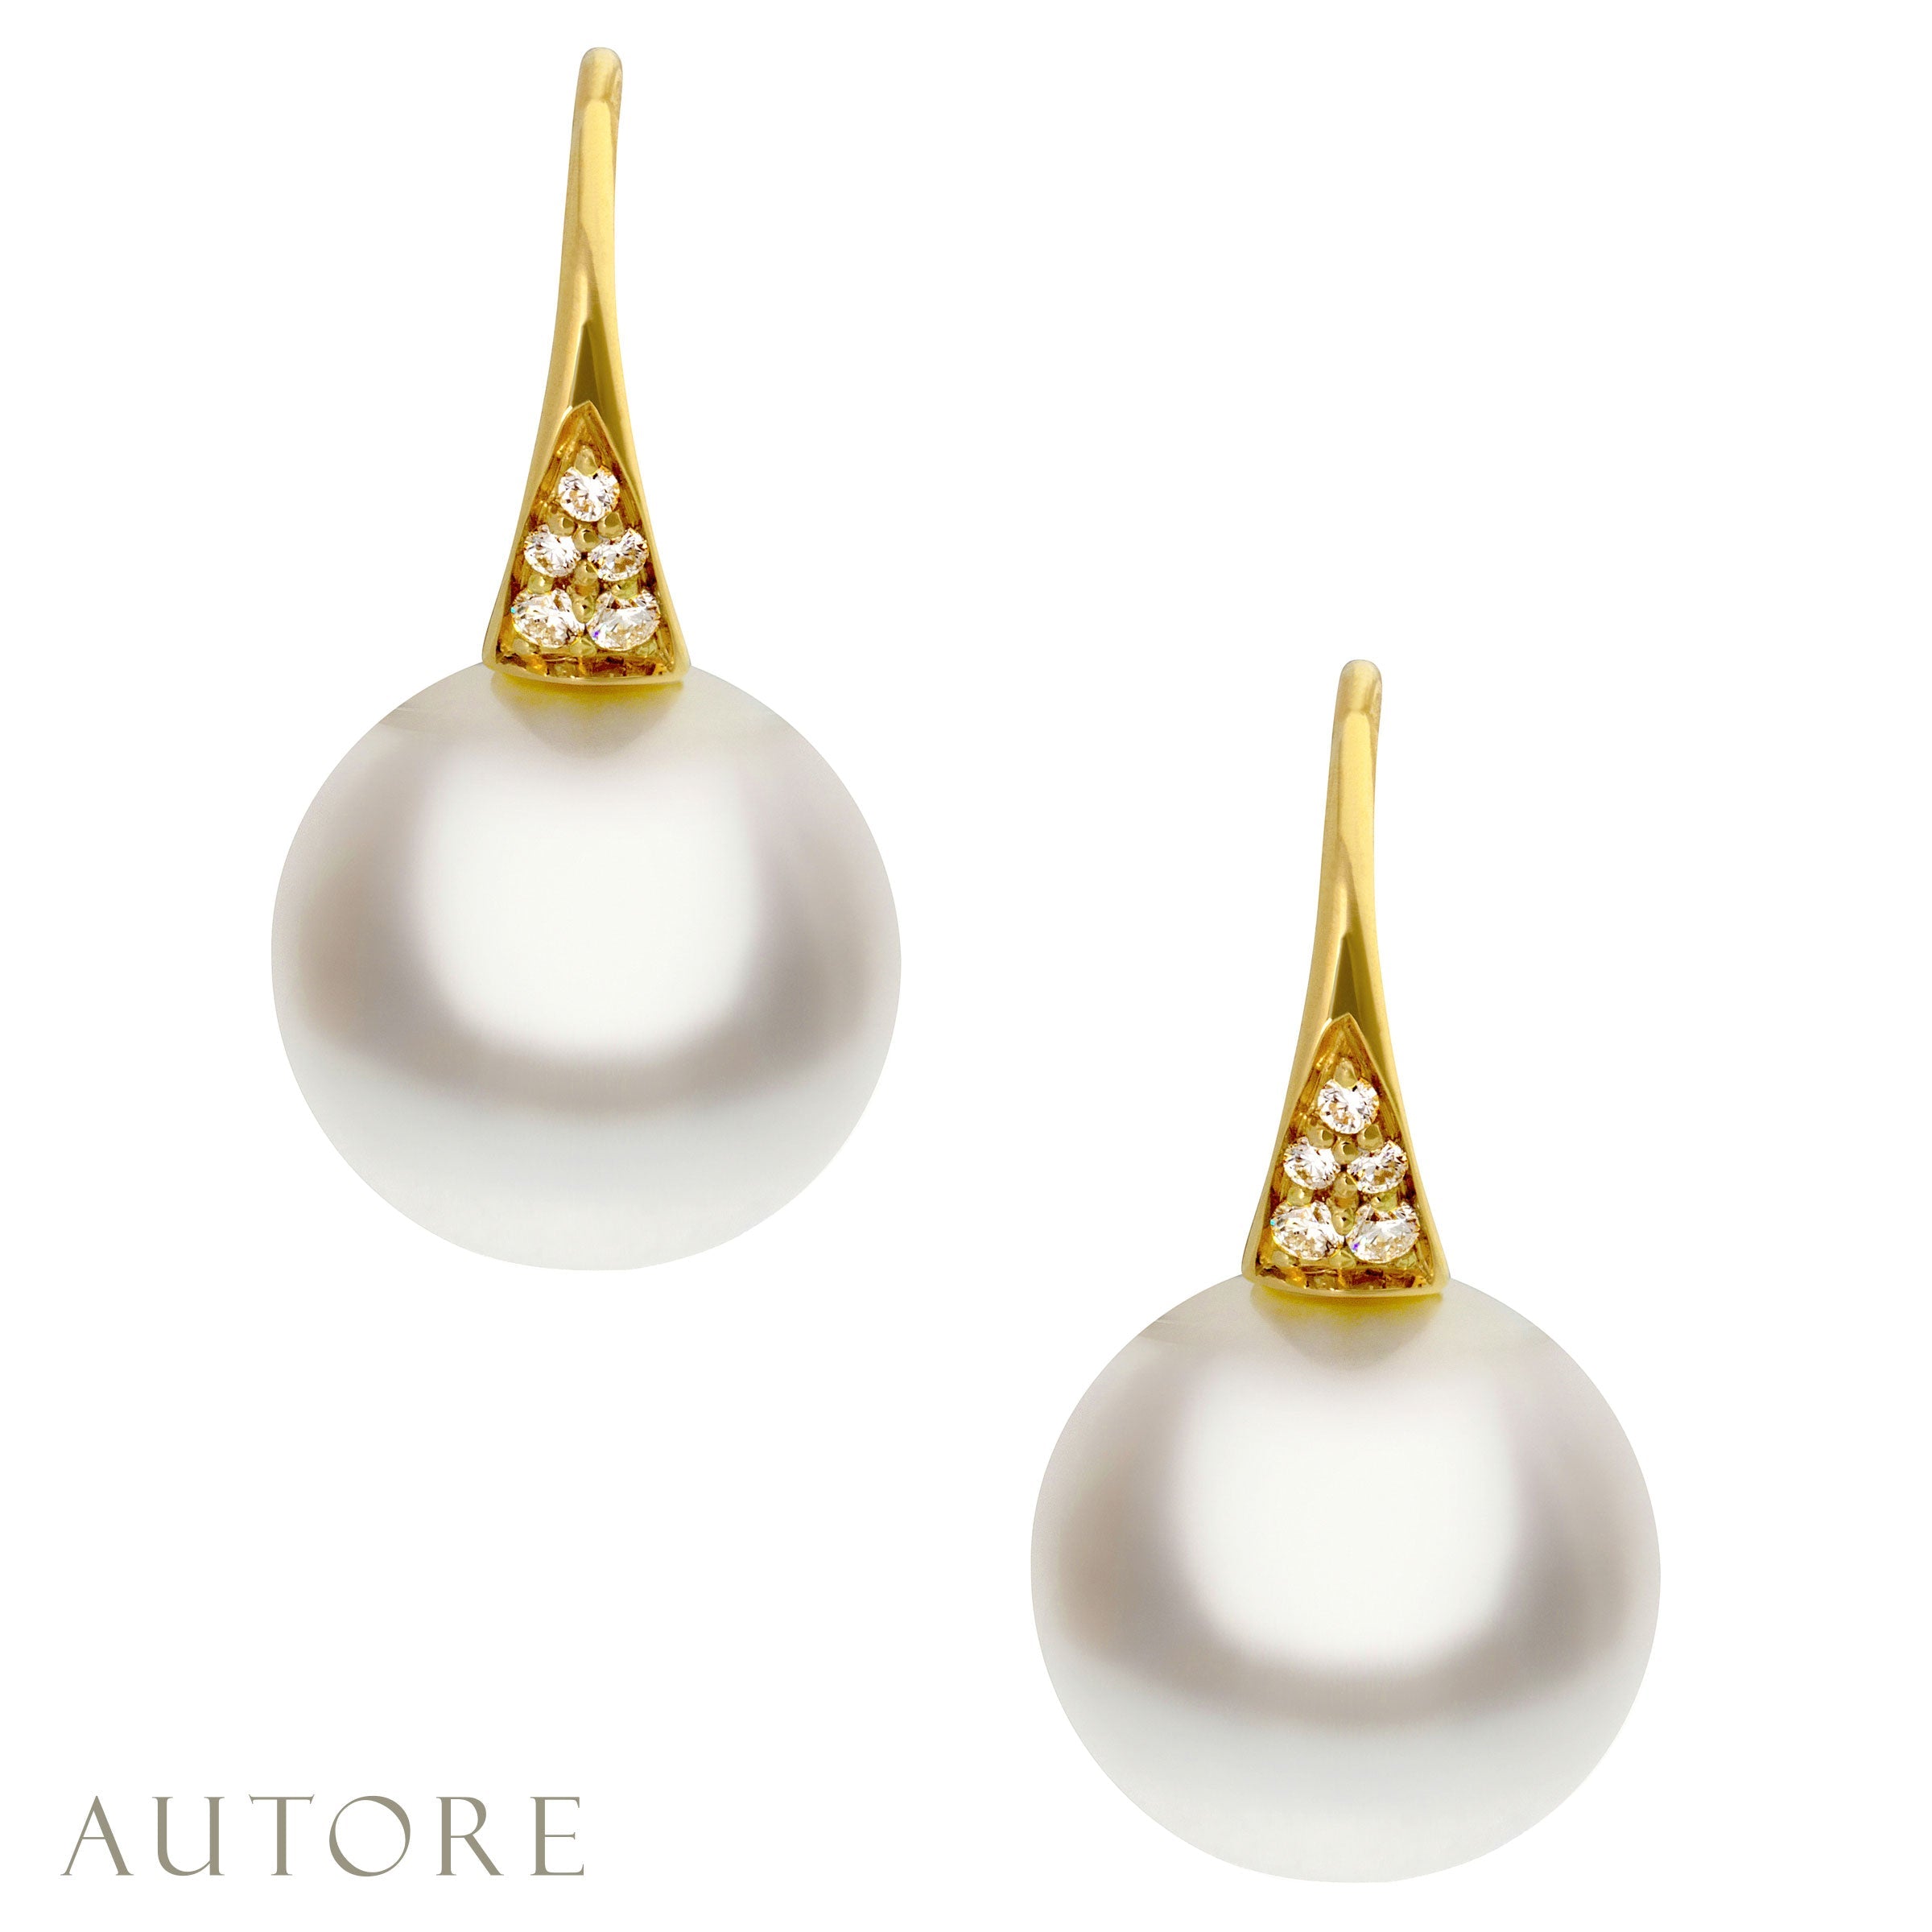 AUTORE 18ct gold 11mm South Sea pearl and diamond drop earrings